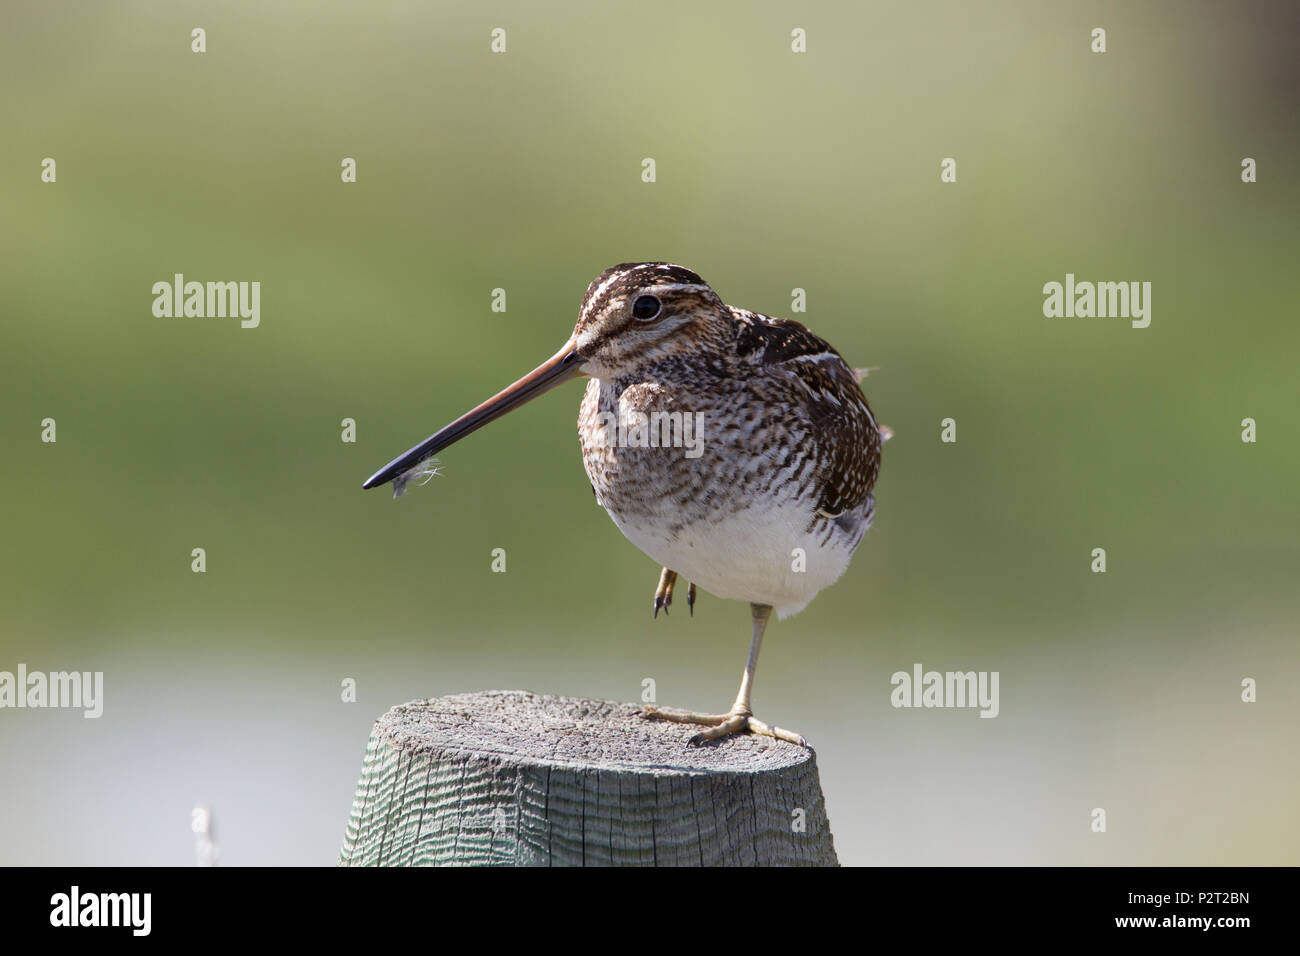 A Wilson's snipe (Gallinago delicata) demonstrates a balancing act as it stands on one leg on a post. Stock Photo